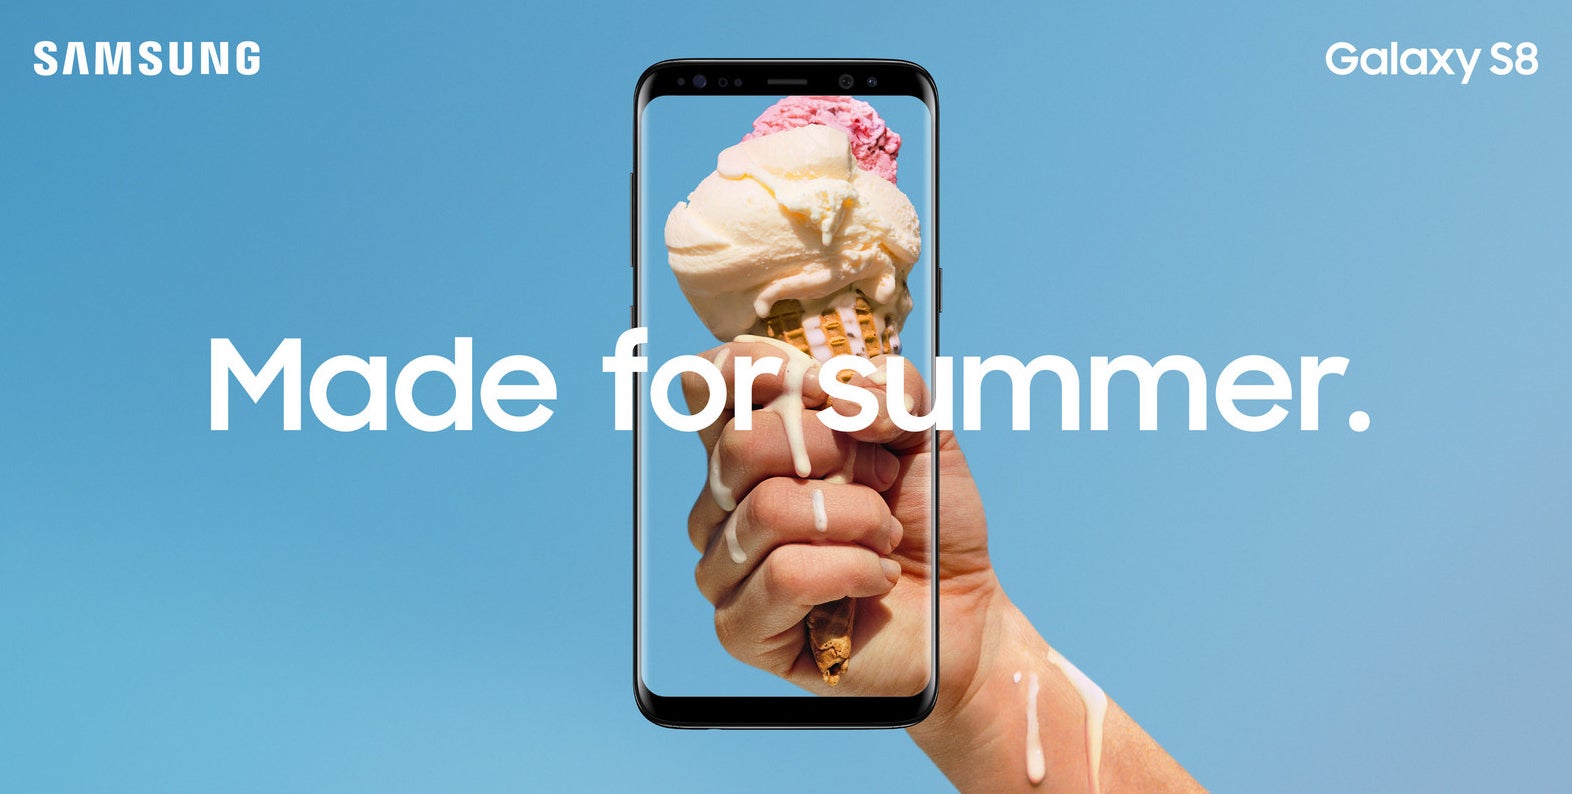 Samsung says the Galaxy S8 and S8+ are made for summer